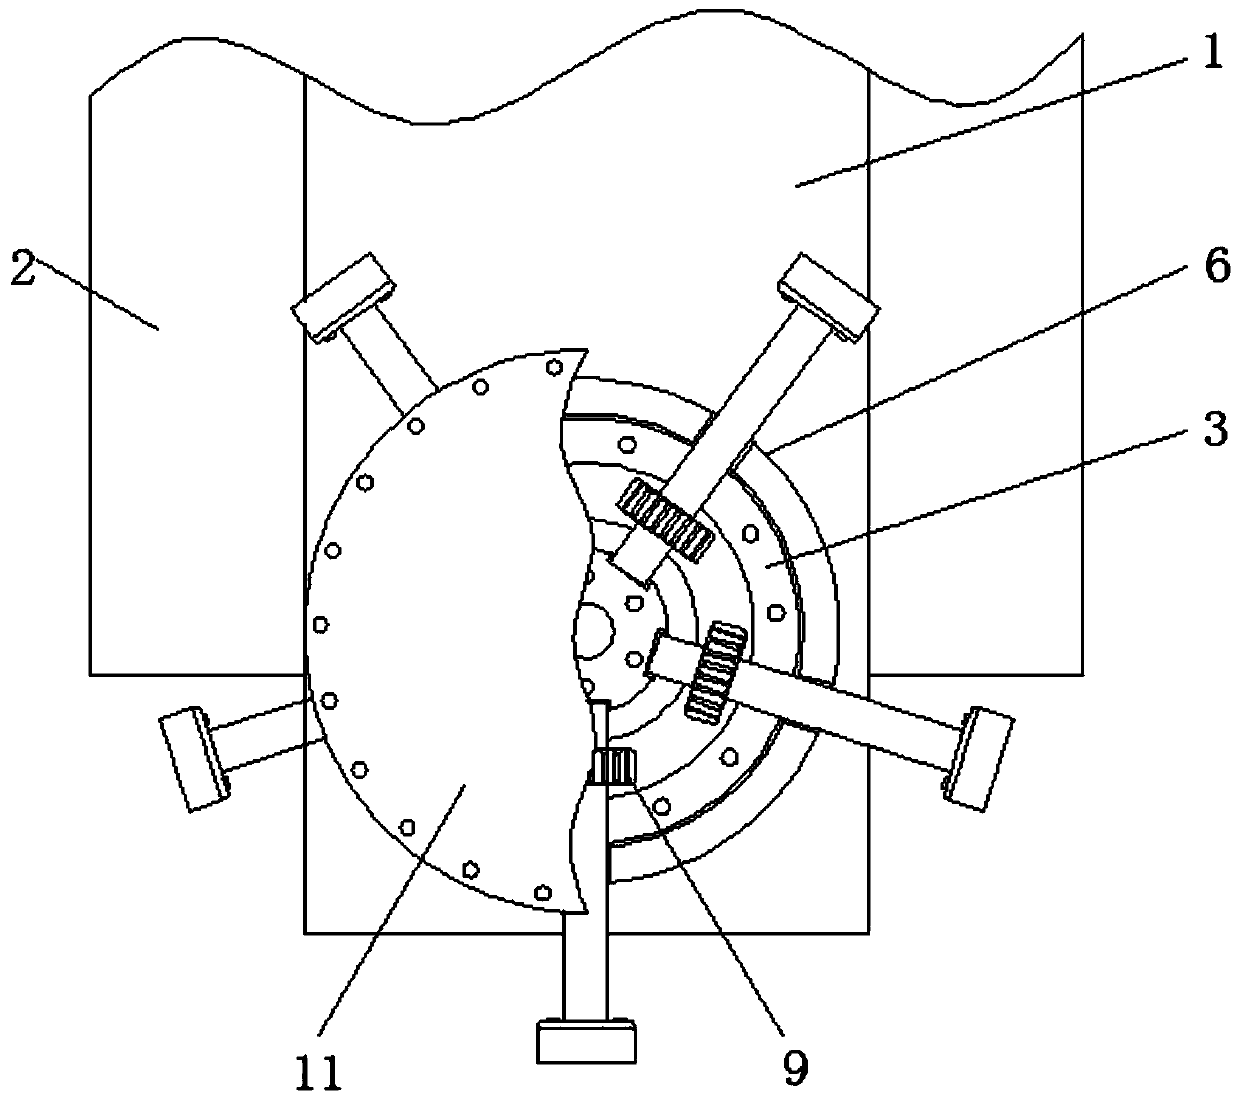 New material machining device capable of automatically changing tools by utilizing gear circulating movement